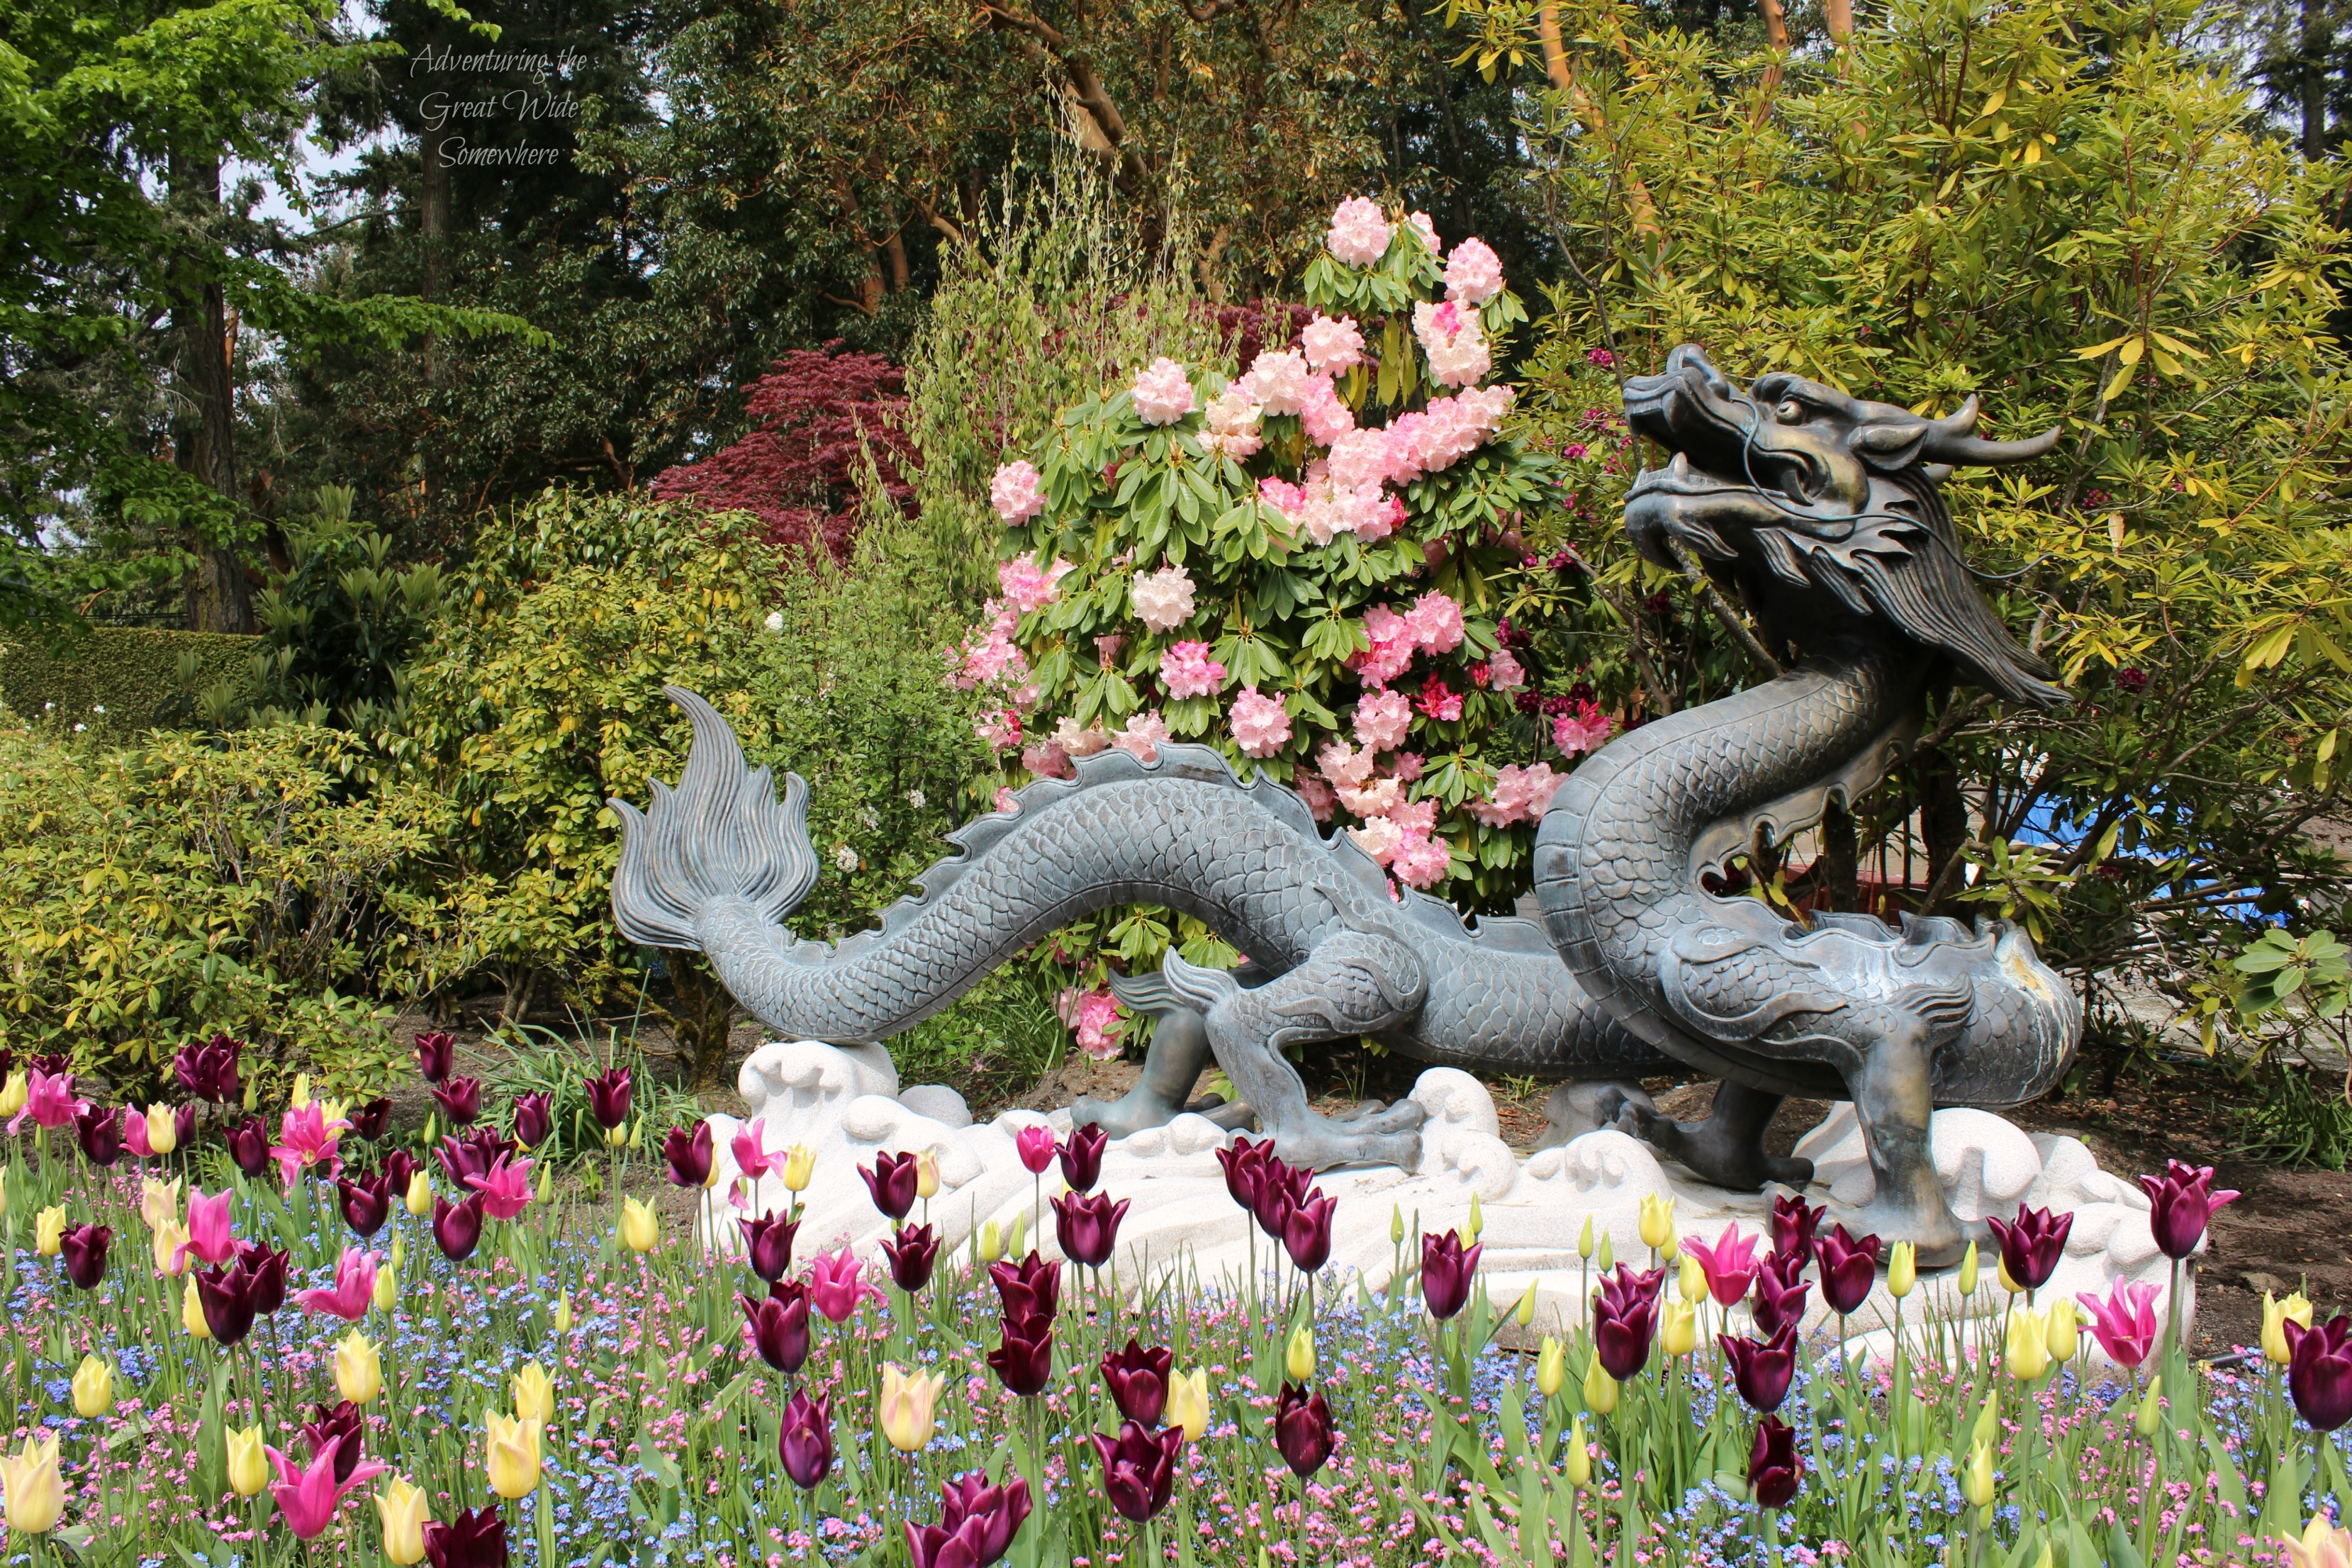 The Butchart Gardens Dragon Statue Removed from the Fountain Base